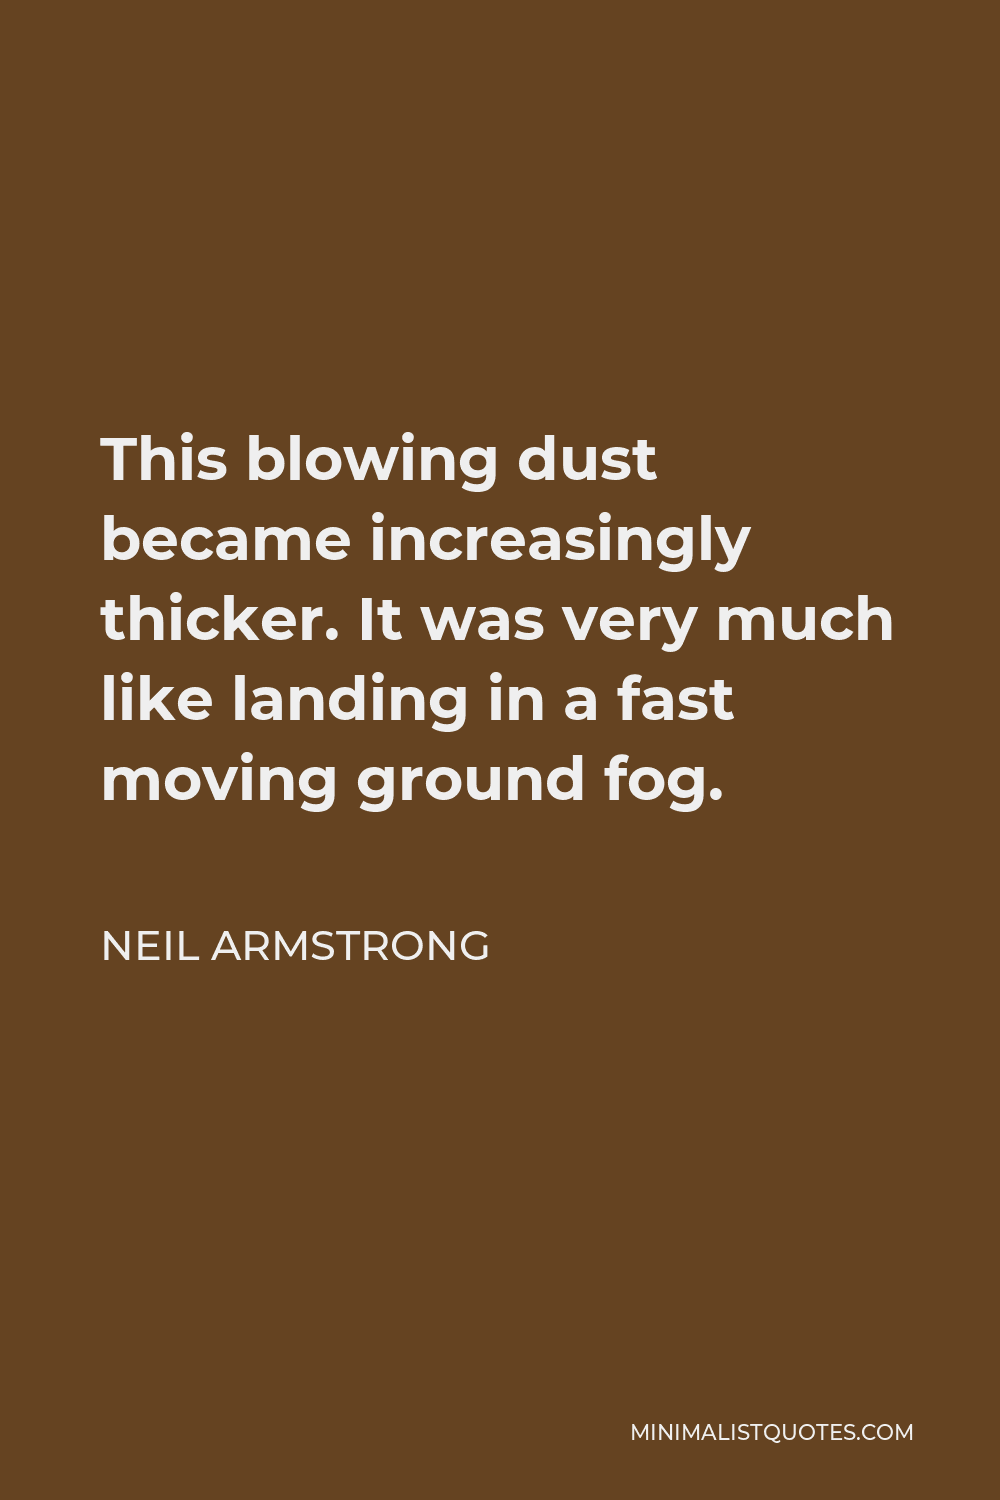 Neil Armstrong Quote - This blowing dust became increasingly thicker. It was very much like landing in a fast moving ground fog.